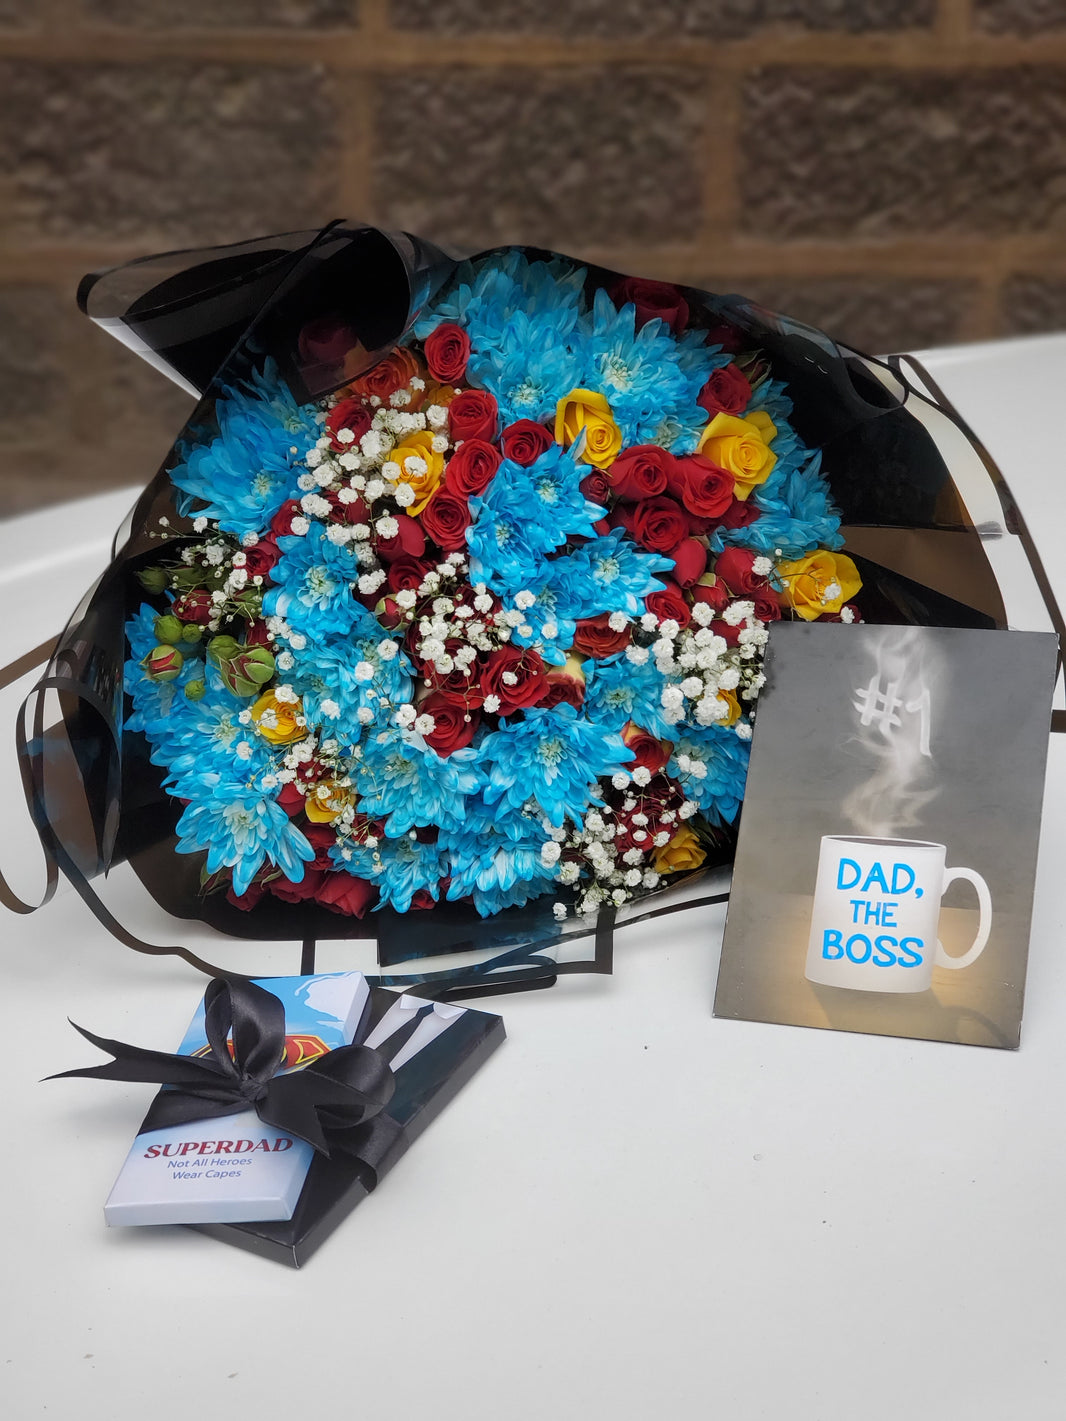 Dad's Delight gift set